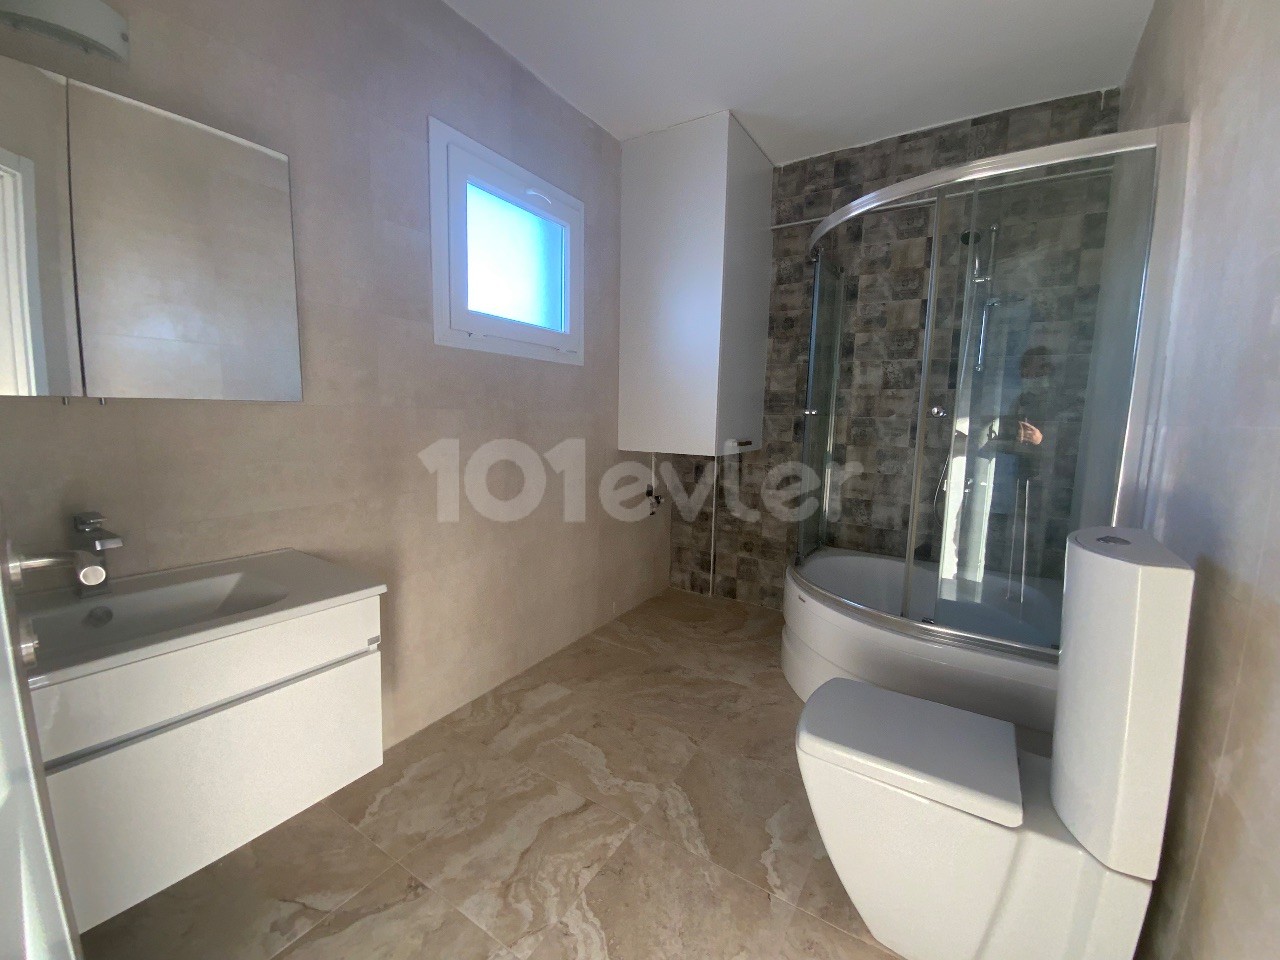 2+1 Apartment with Pool with Sea and Mountain Views for Sale in Kyrenia Central Cyprus ** 